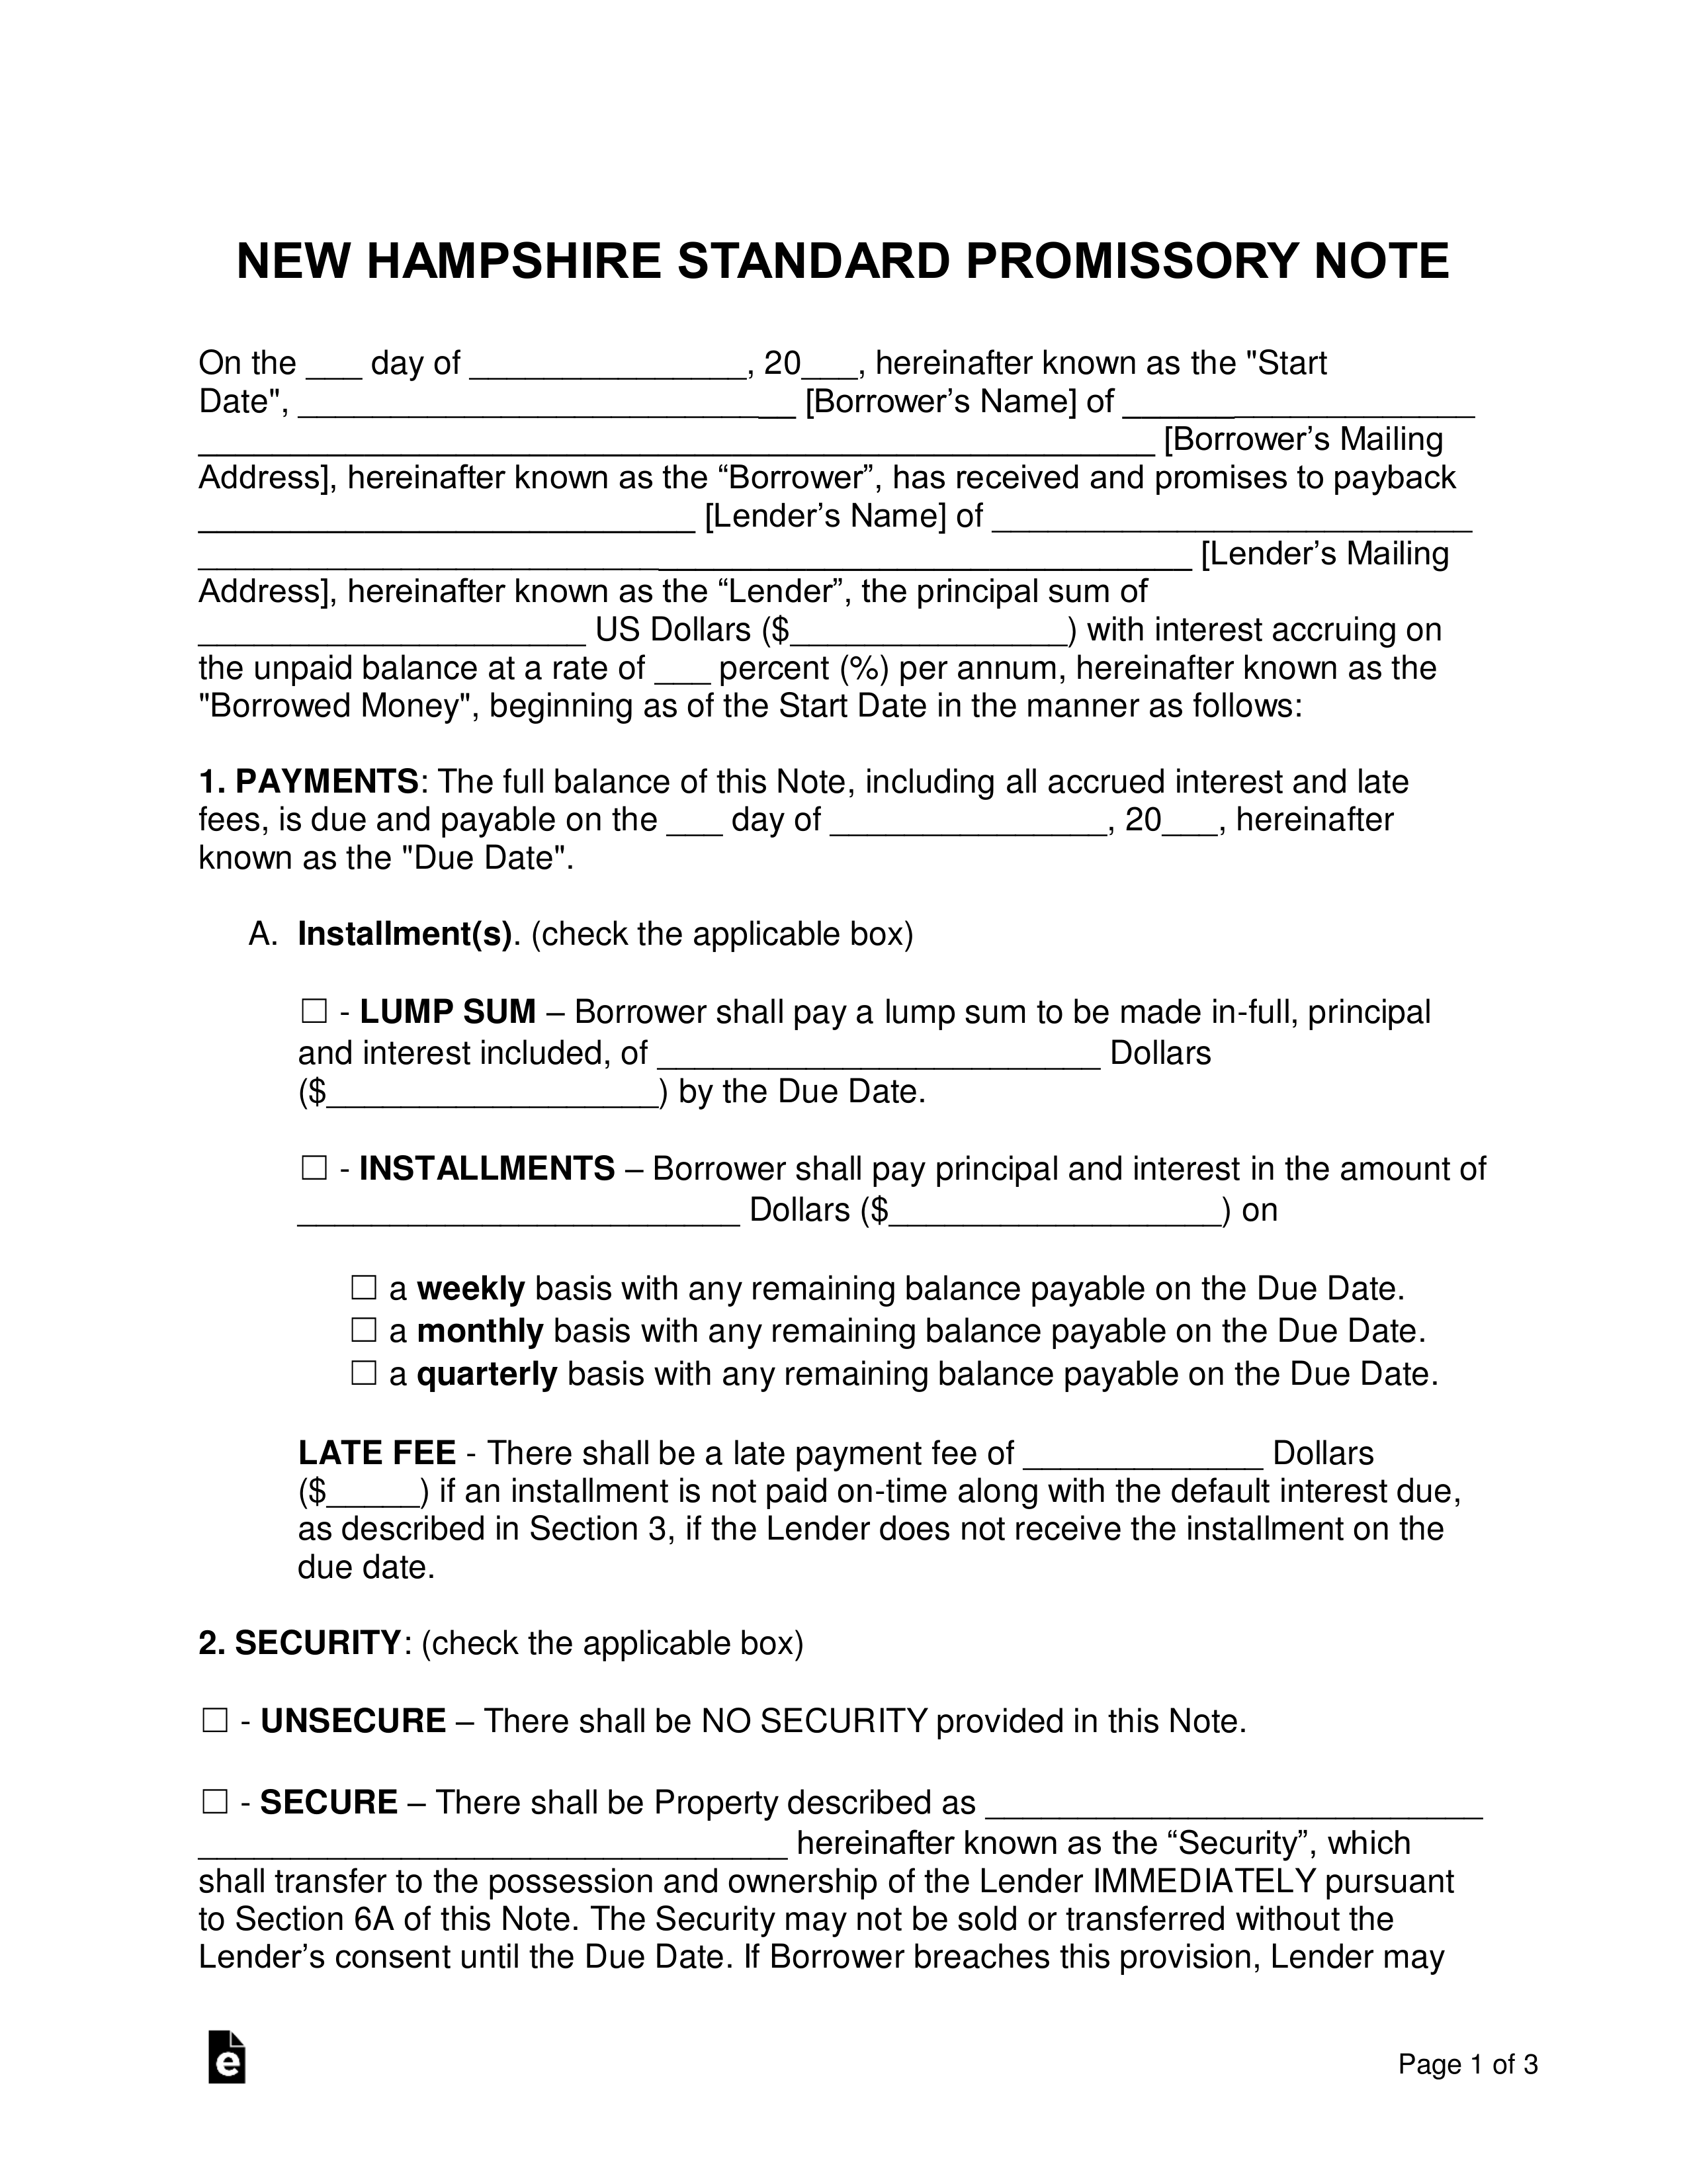 New Hampshire Promissory Note Templates (2)